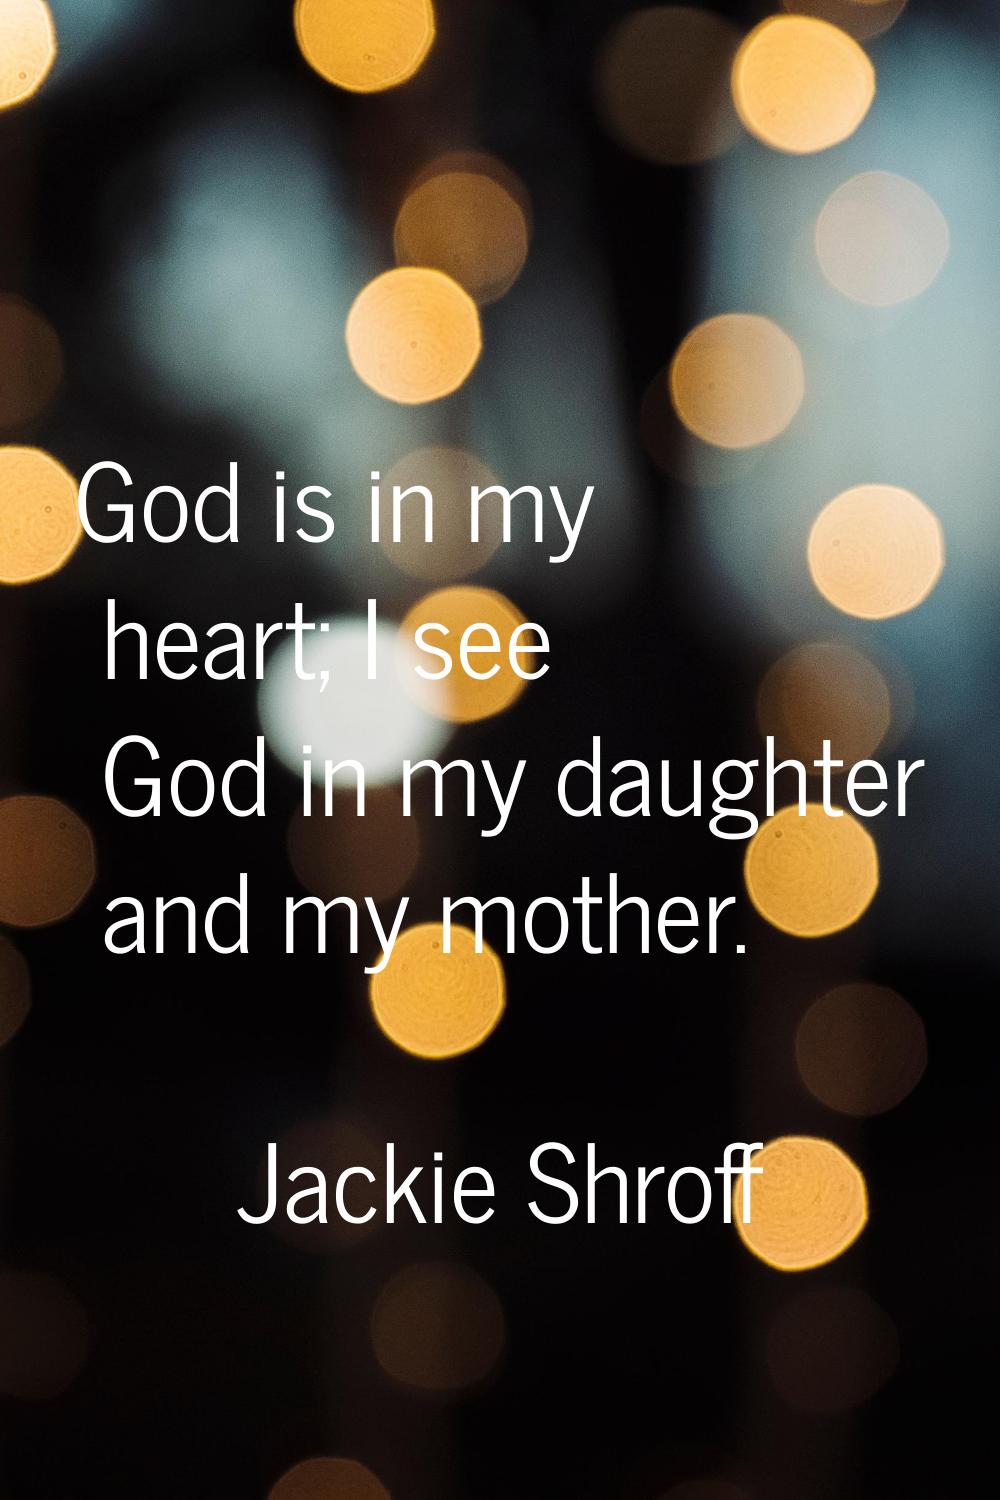 God is in my heart; I see God in my daughter and my mother.